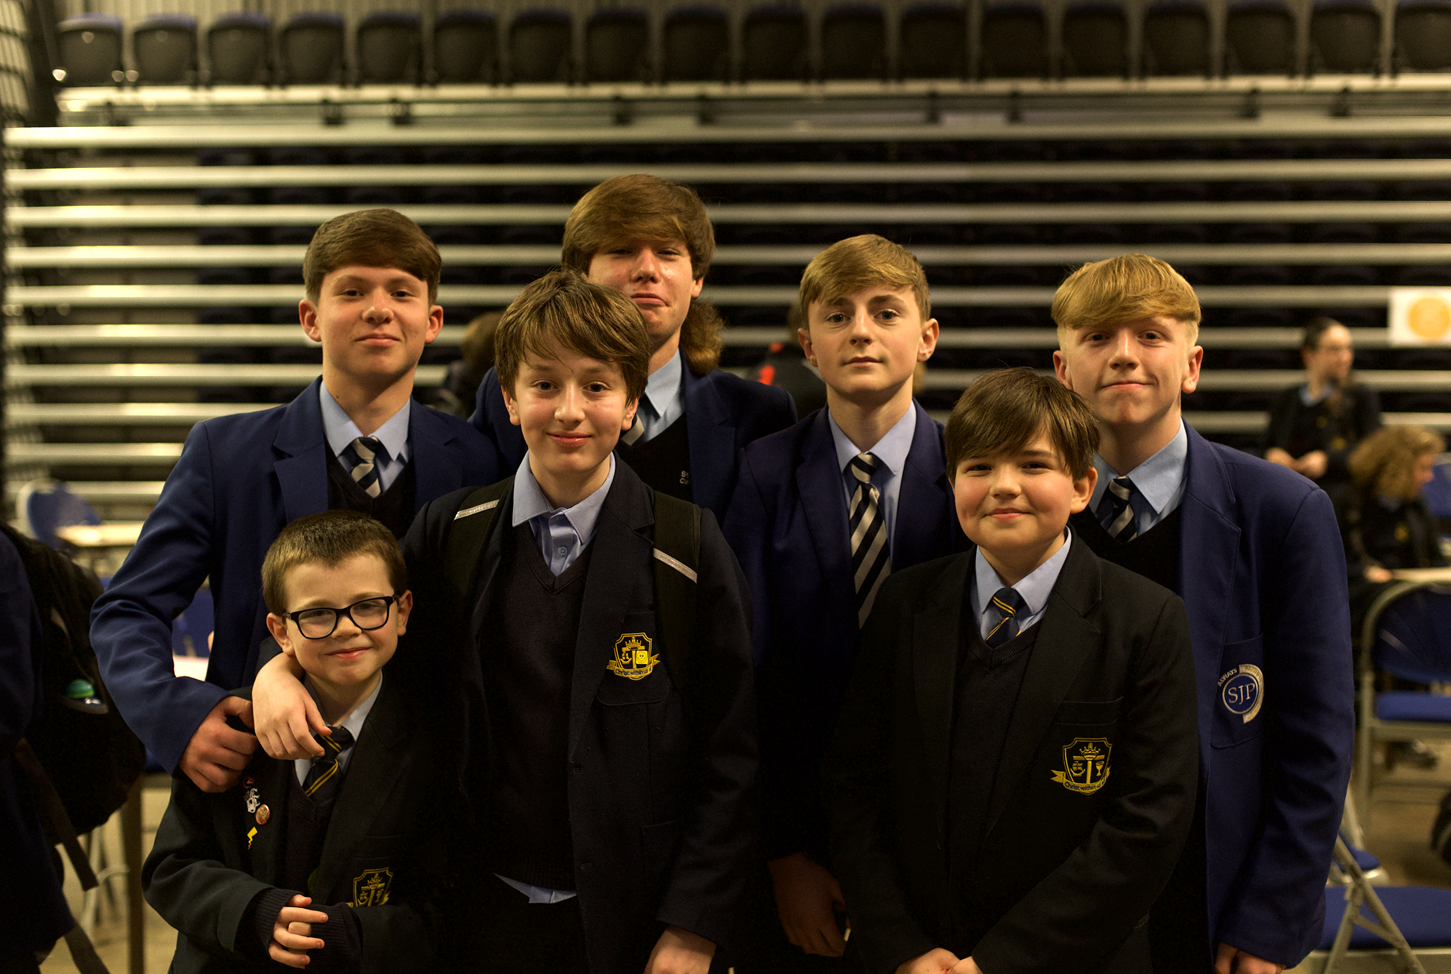 The conference took place at St John Plessington Catholic College, with C Change's student learning ambassadors meticulously planning and managing the entire event